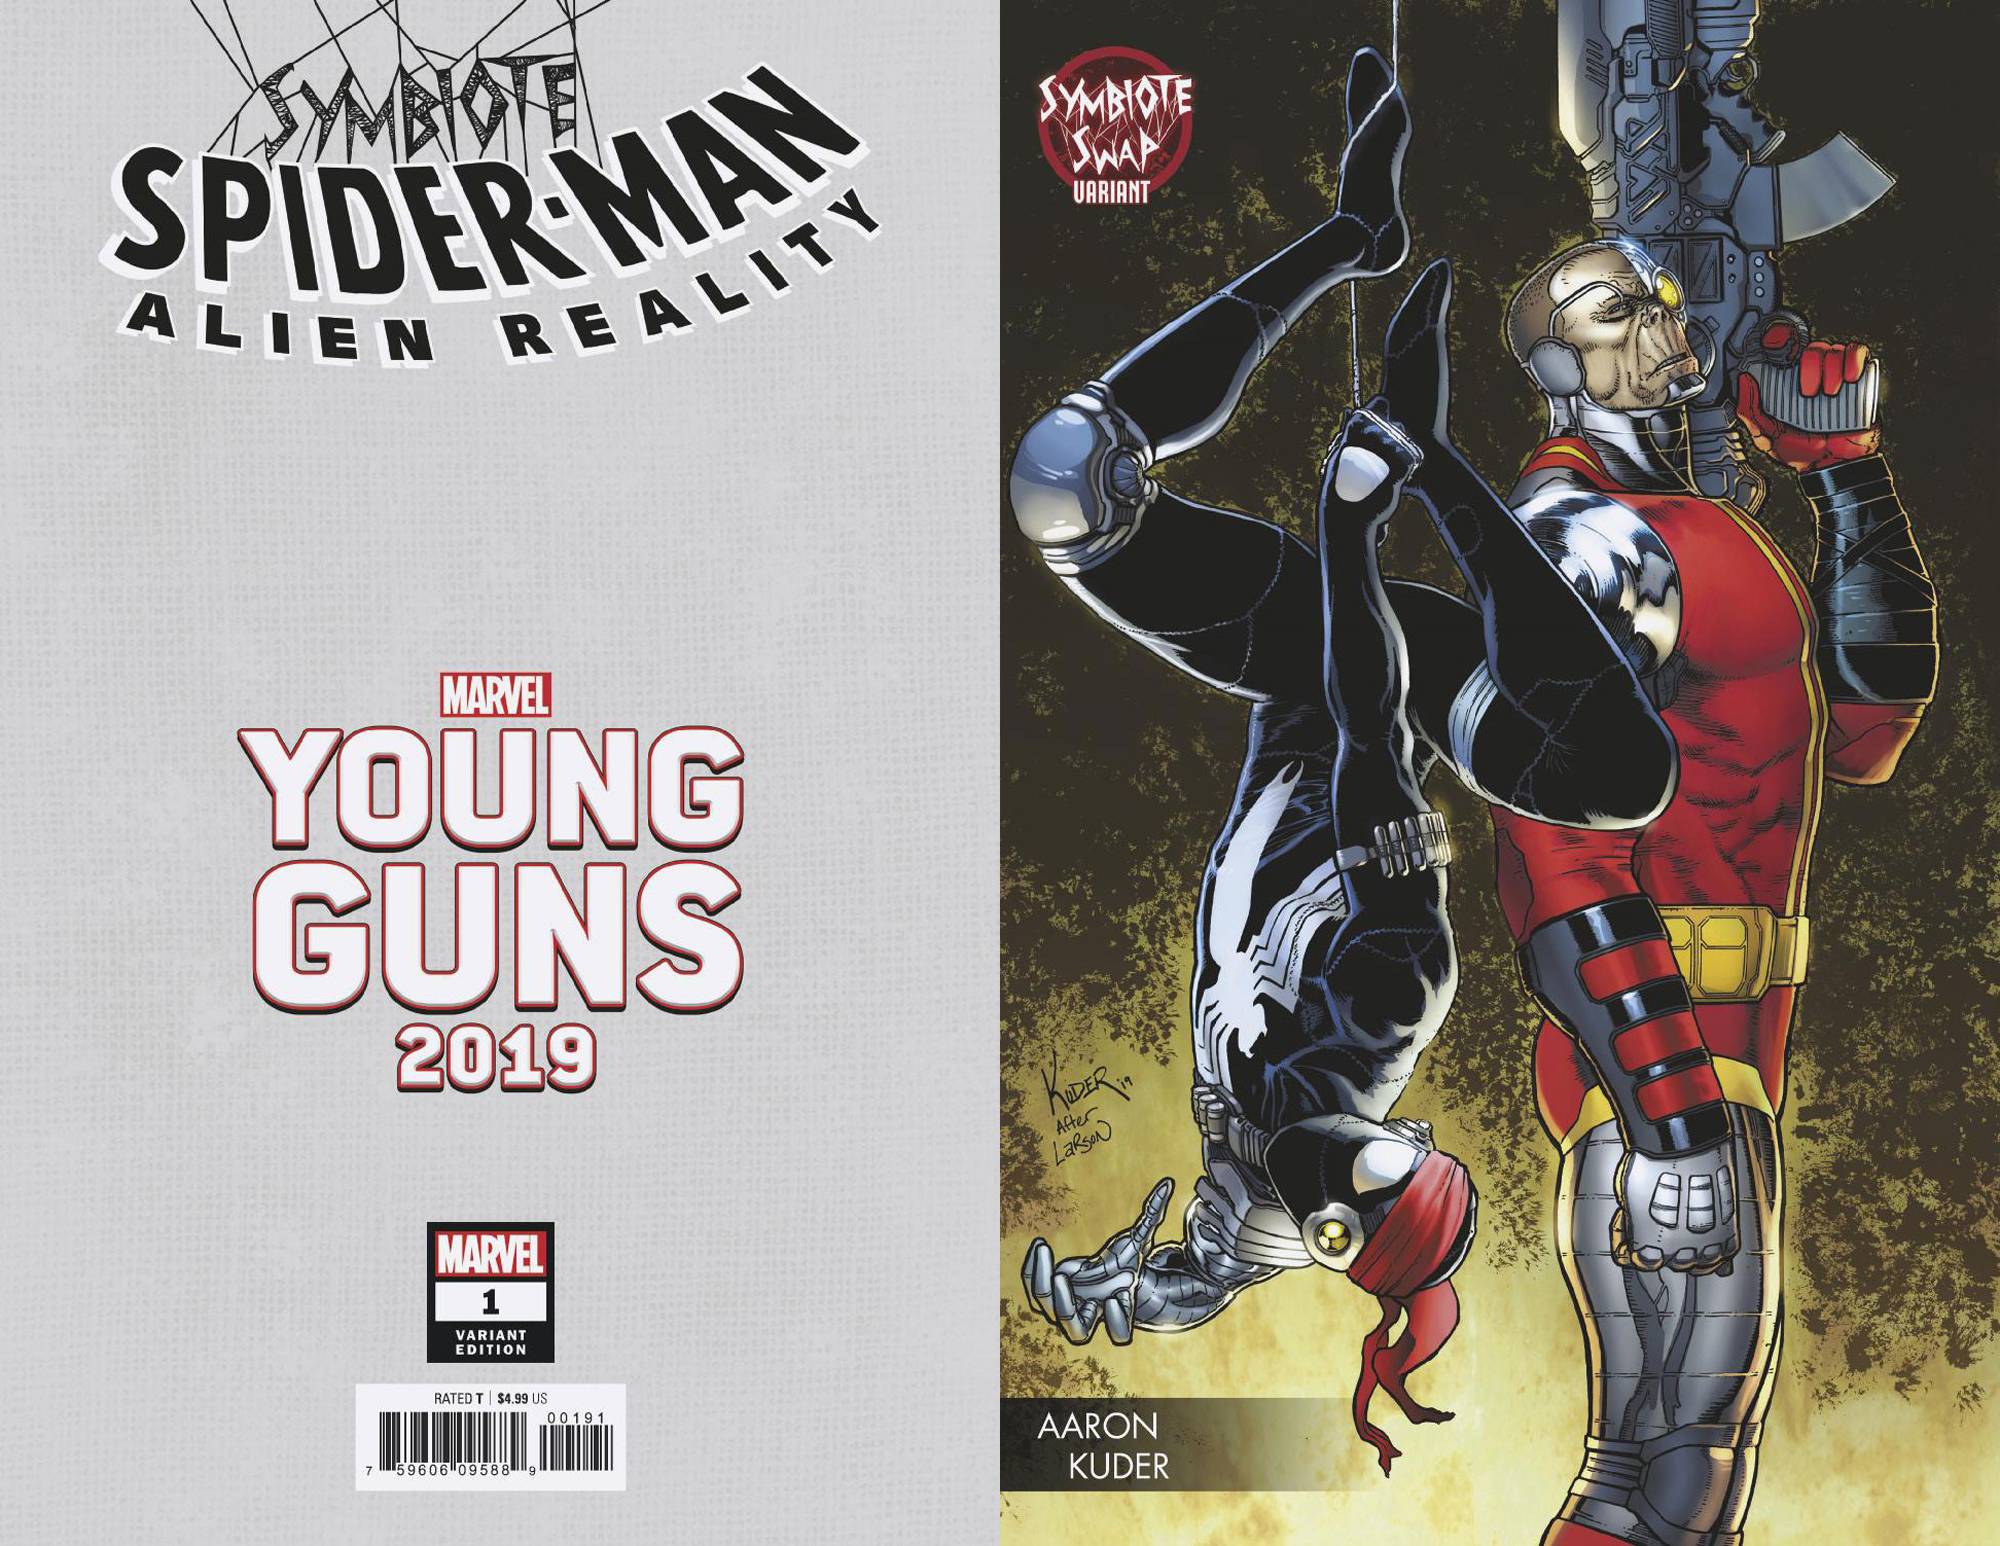 SYMBIOTE SPIDER-MAN ALIEN REALITY #1 (OF 5) KUDER YOUNG GUNS